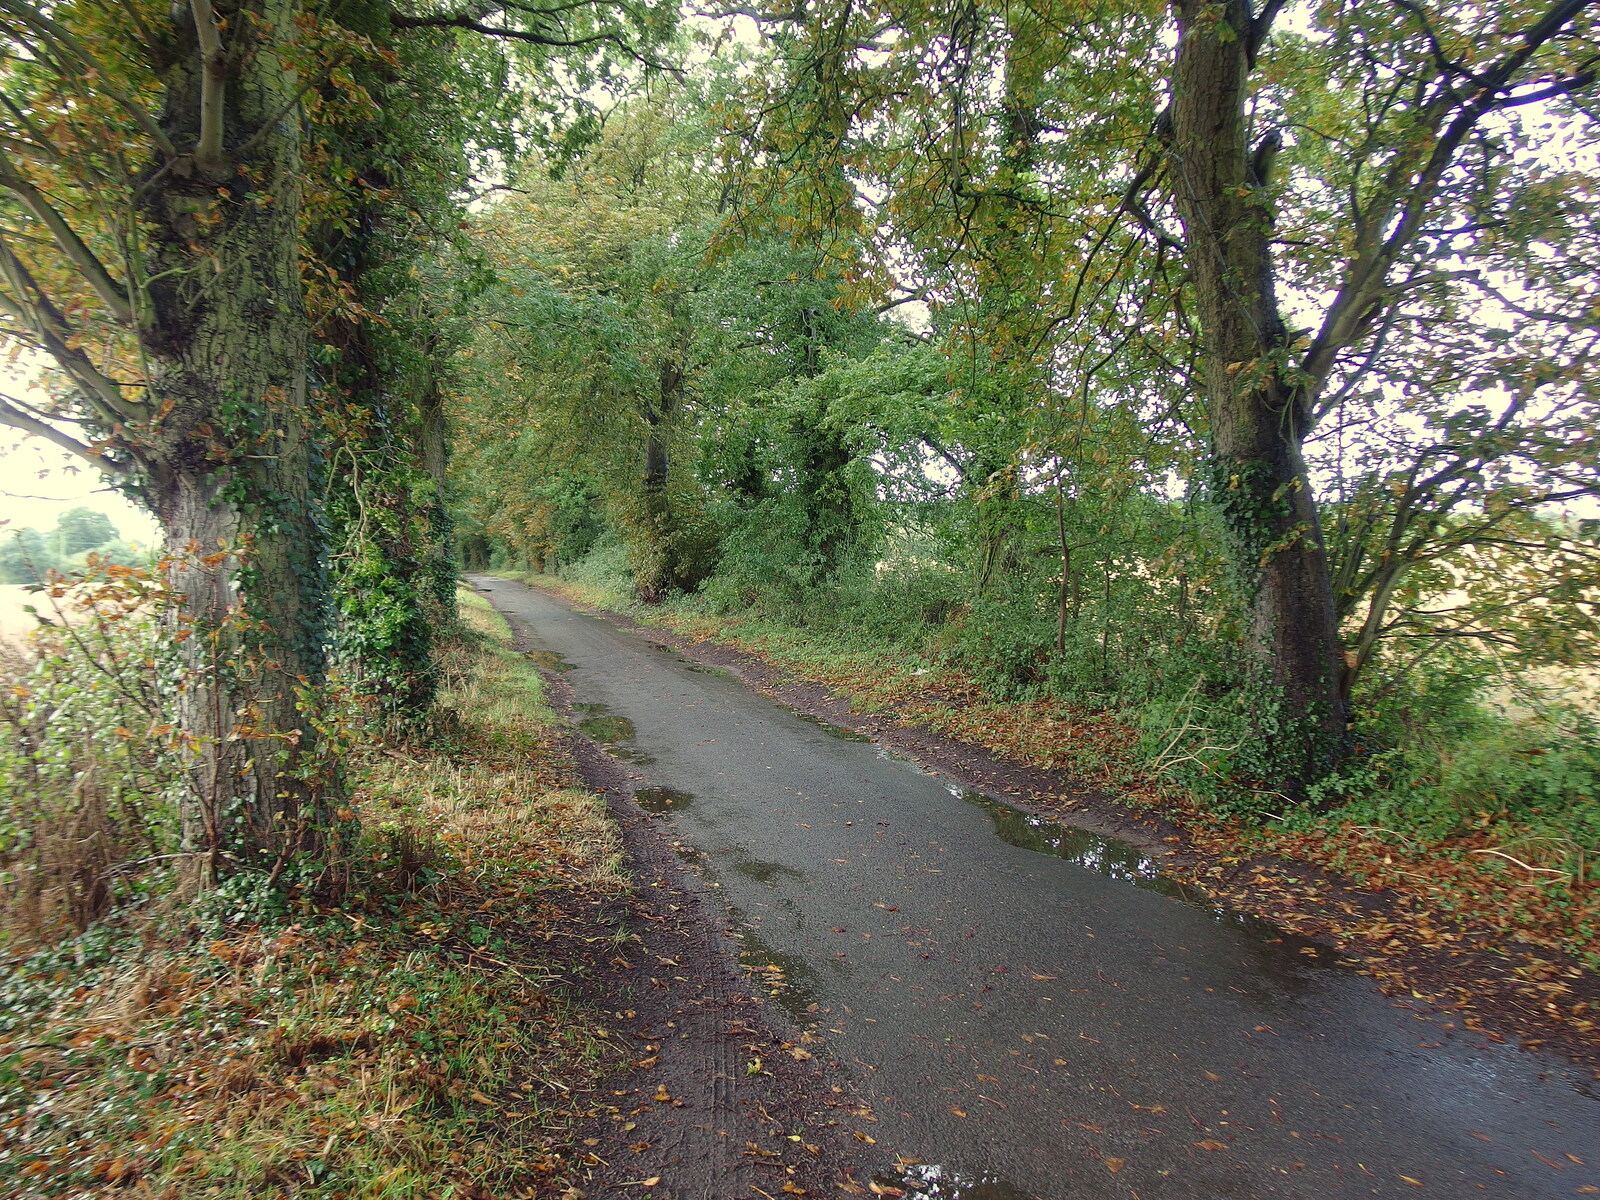 The road to Thornham from Sunday Lunch at the Village Hall, Brome, Suffolk - 10th October 2021